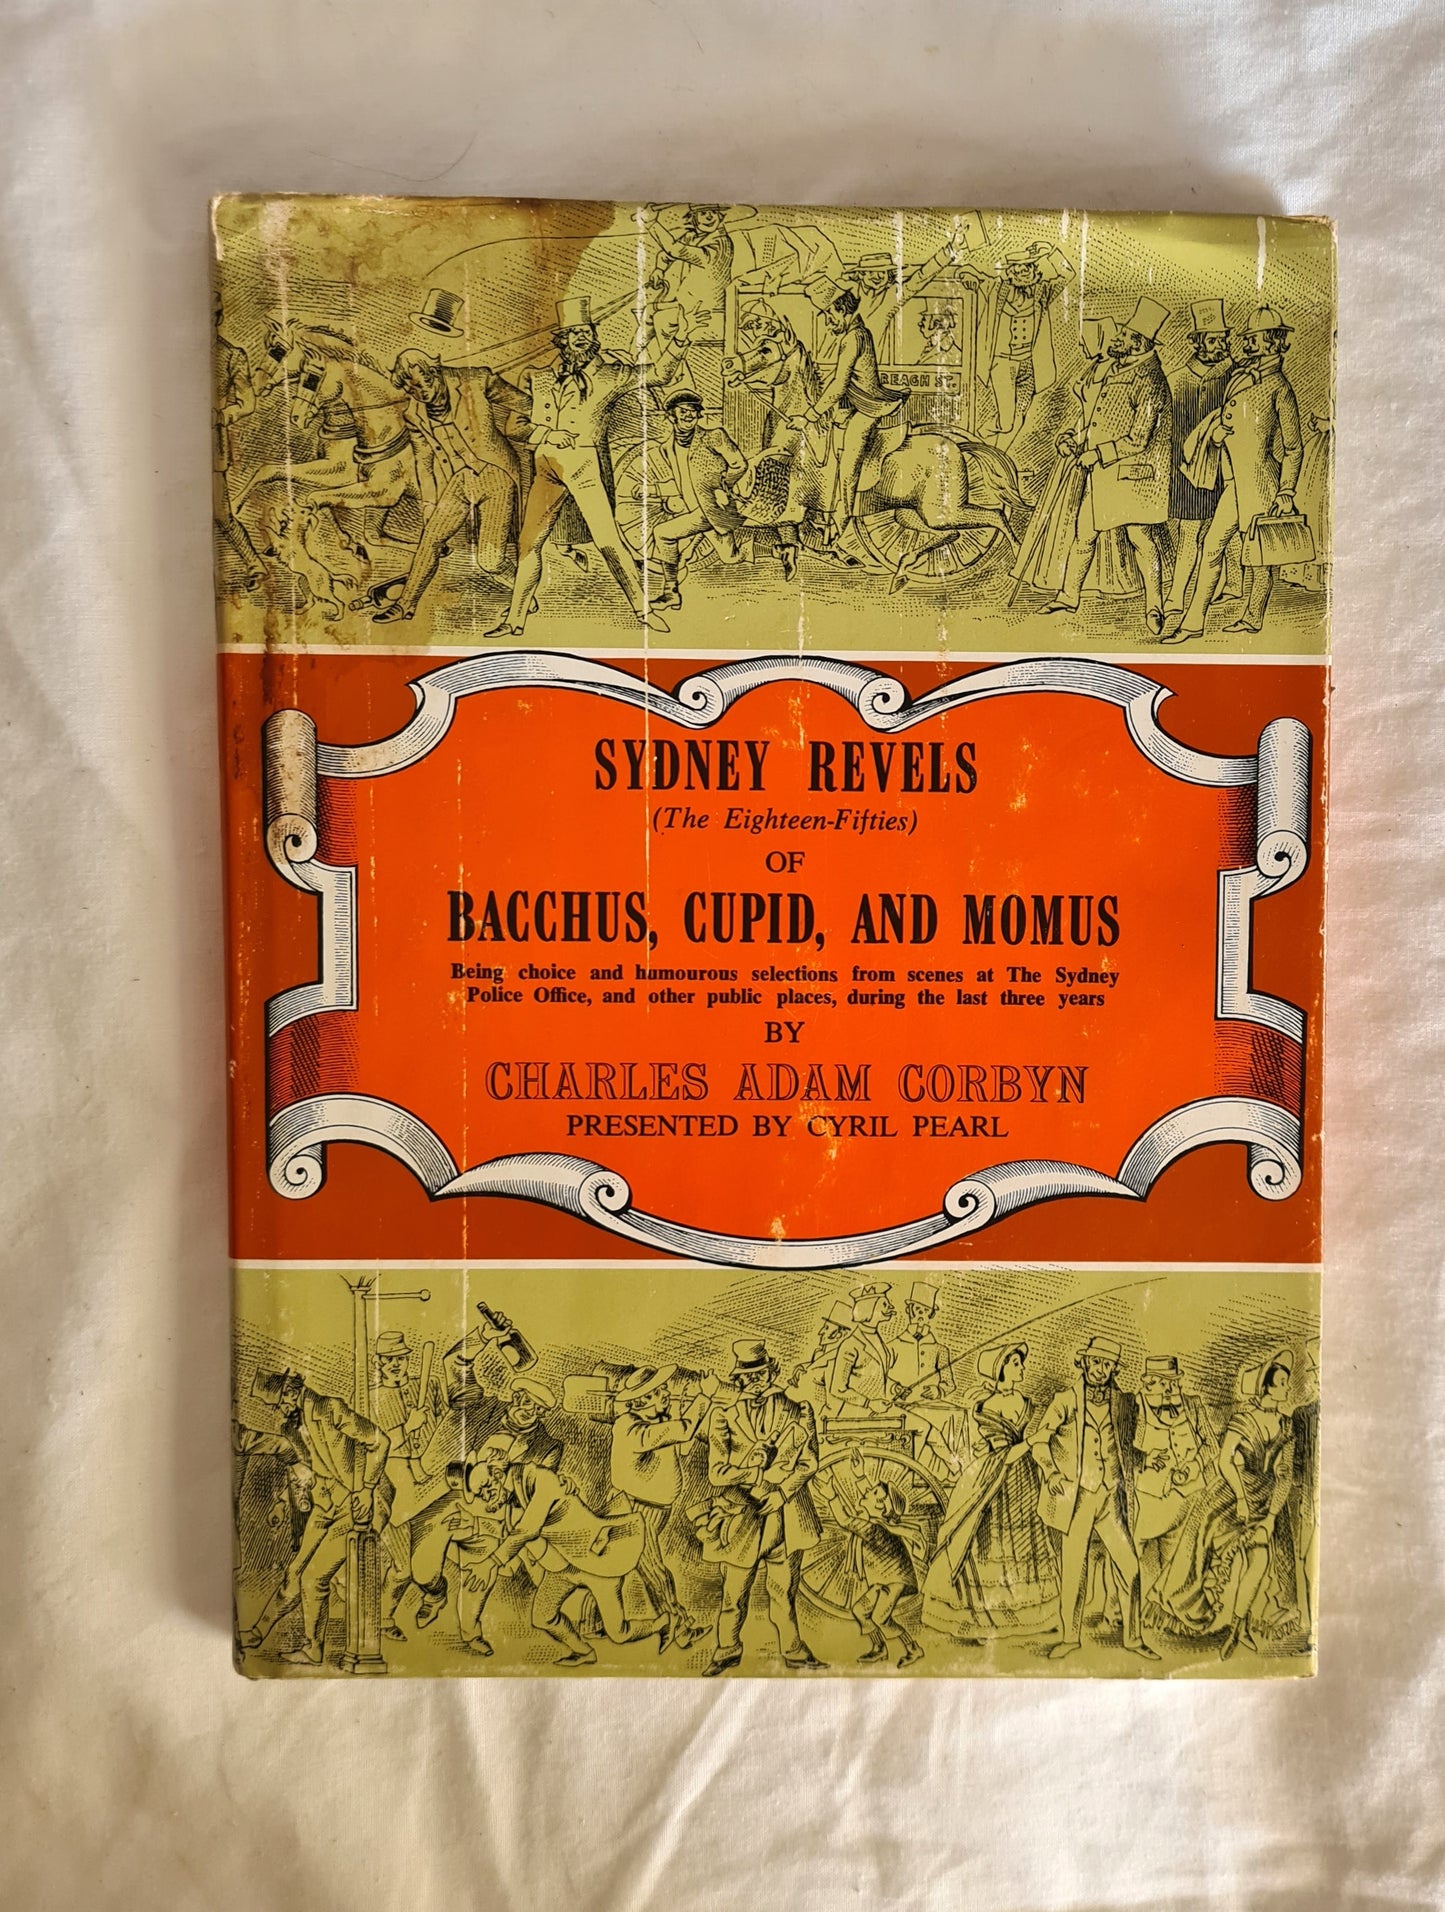 Sydney Revels (The Eighteen-Fifties) of Bacchus, Cupid, and Momus  Being choice and humorous selections from scenes at The Sydney Police Office, and other public places during the last three years  by Charles Adam Corbyn  Presented by Cyril Pearl